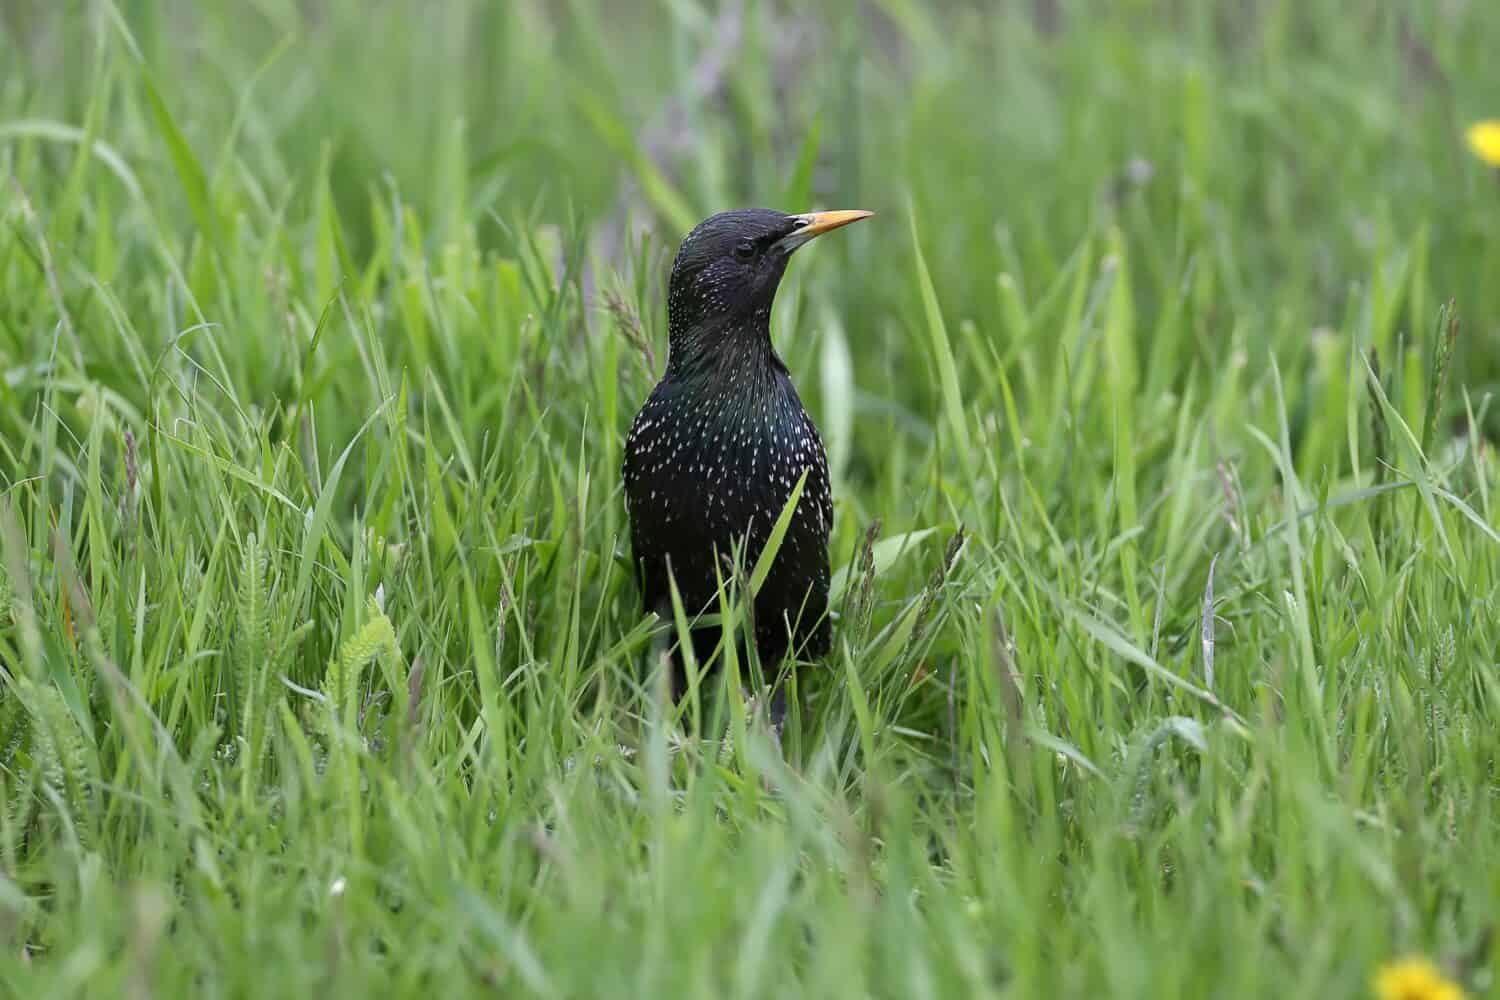 An adult common starling in breeding plumage is shot close-up walking through the bright green grass